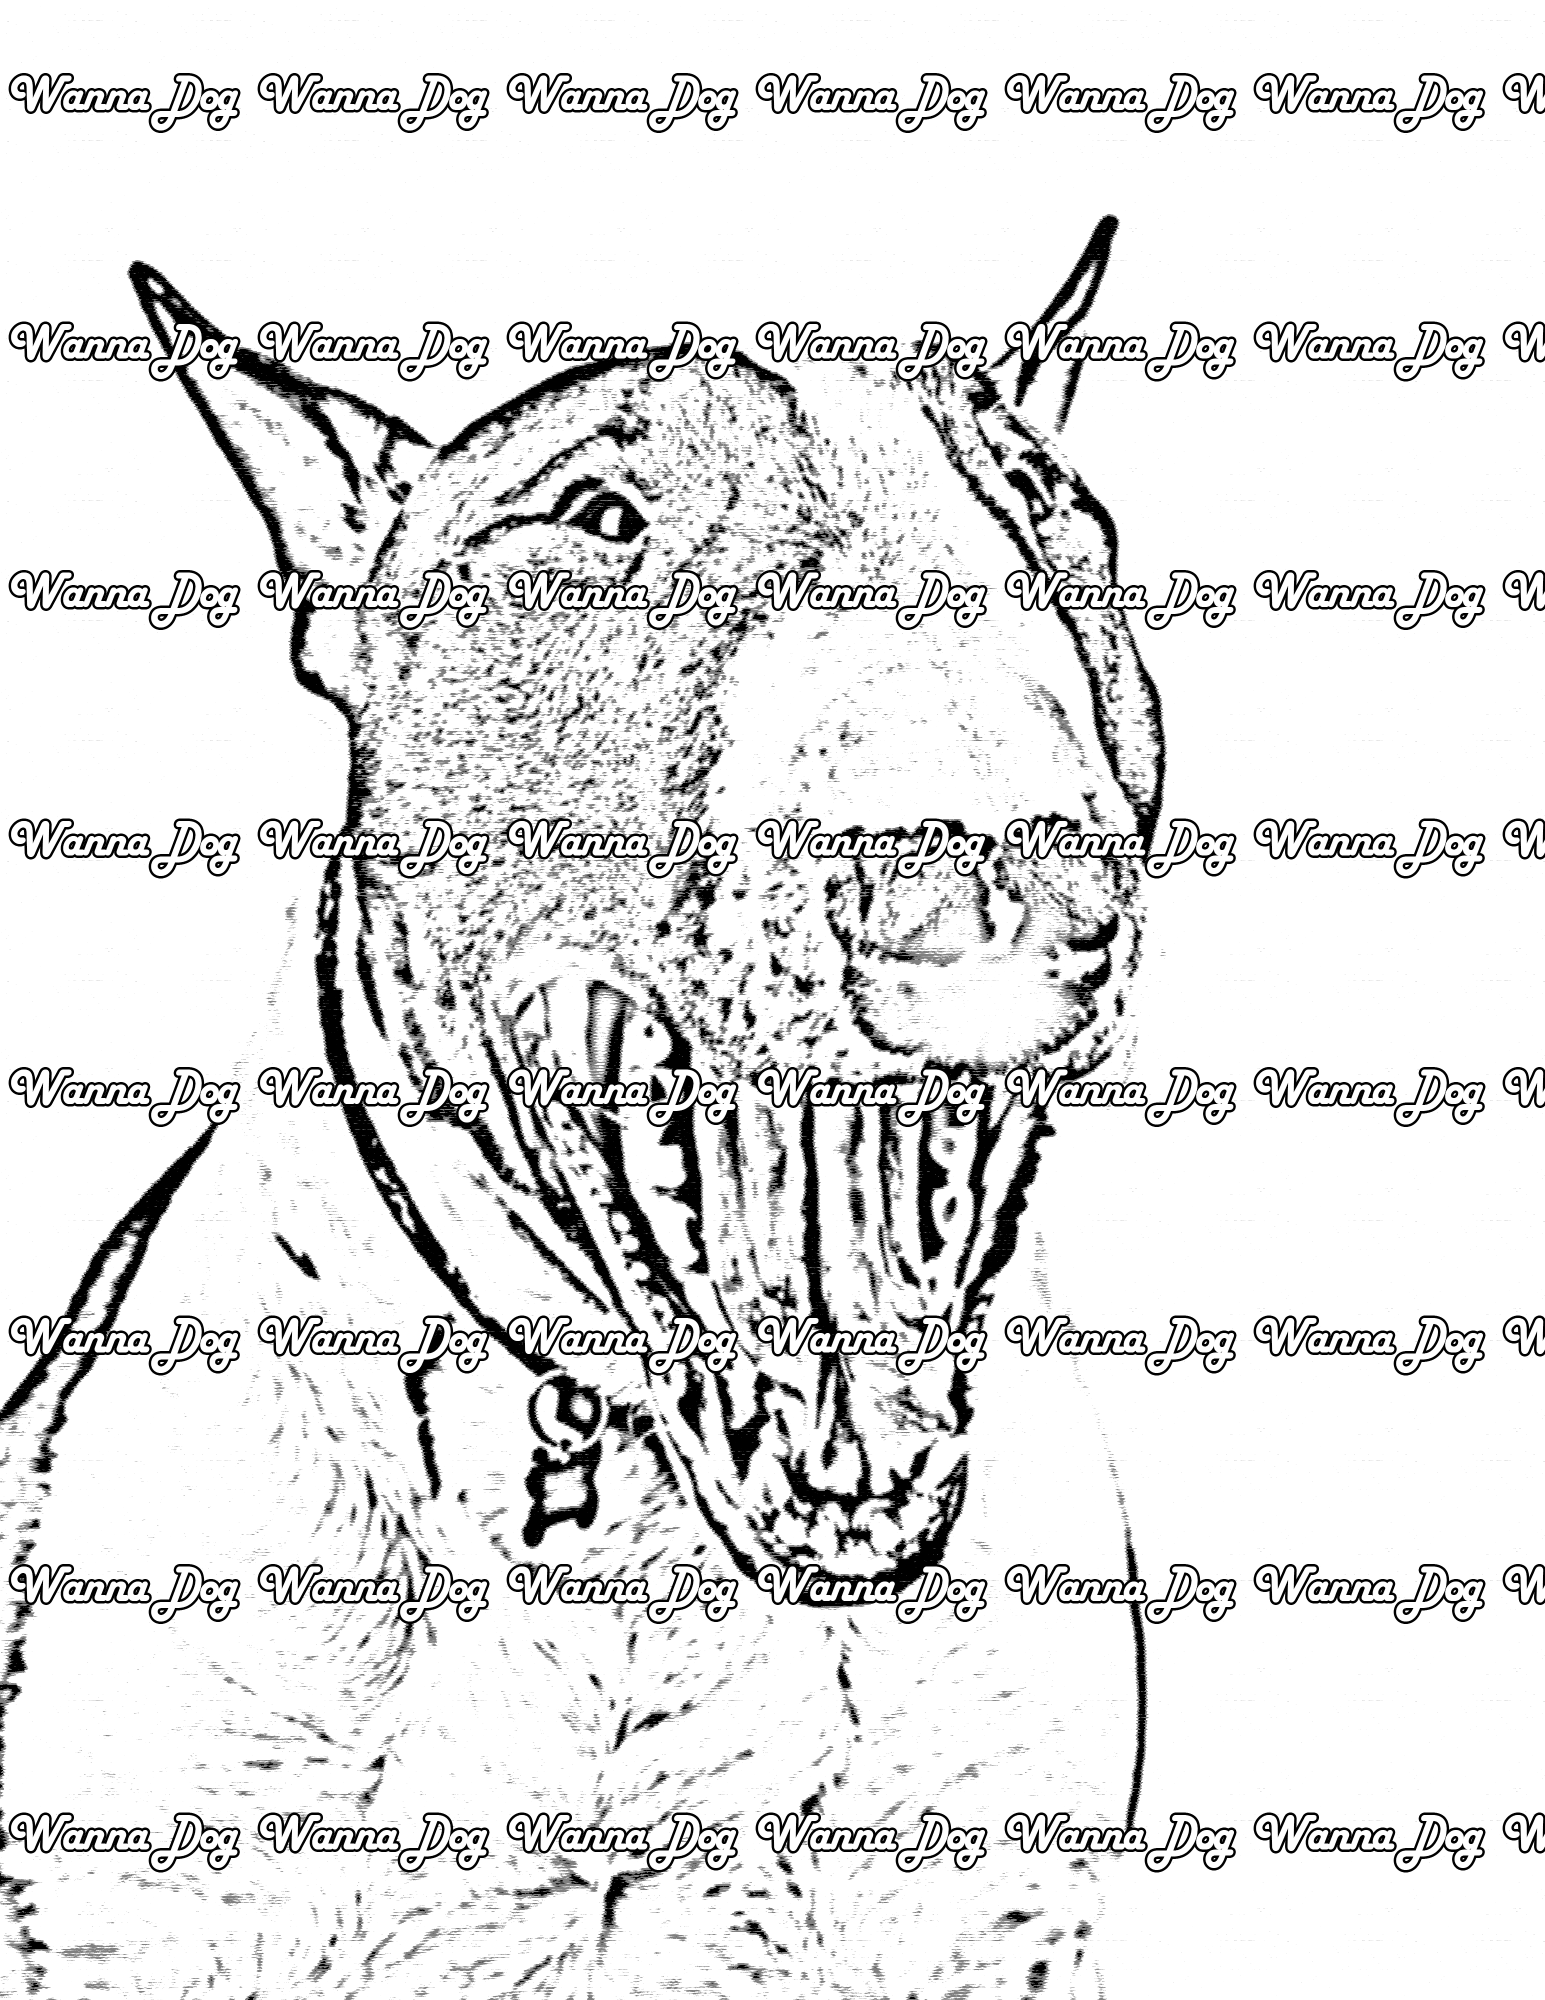 Bull Terrier Coloring Page of a Bull Terrier with their mouth open